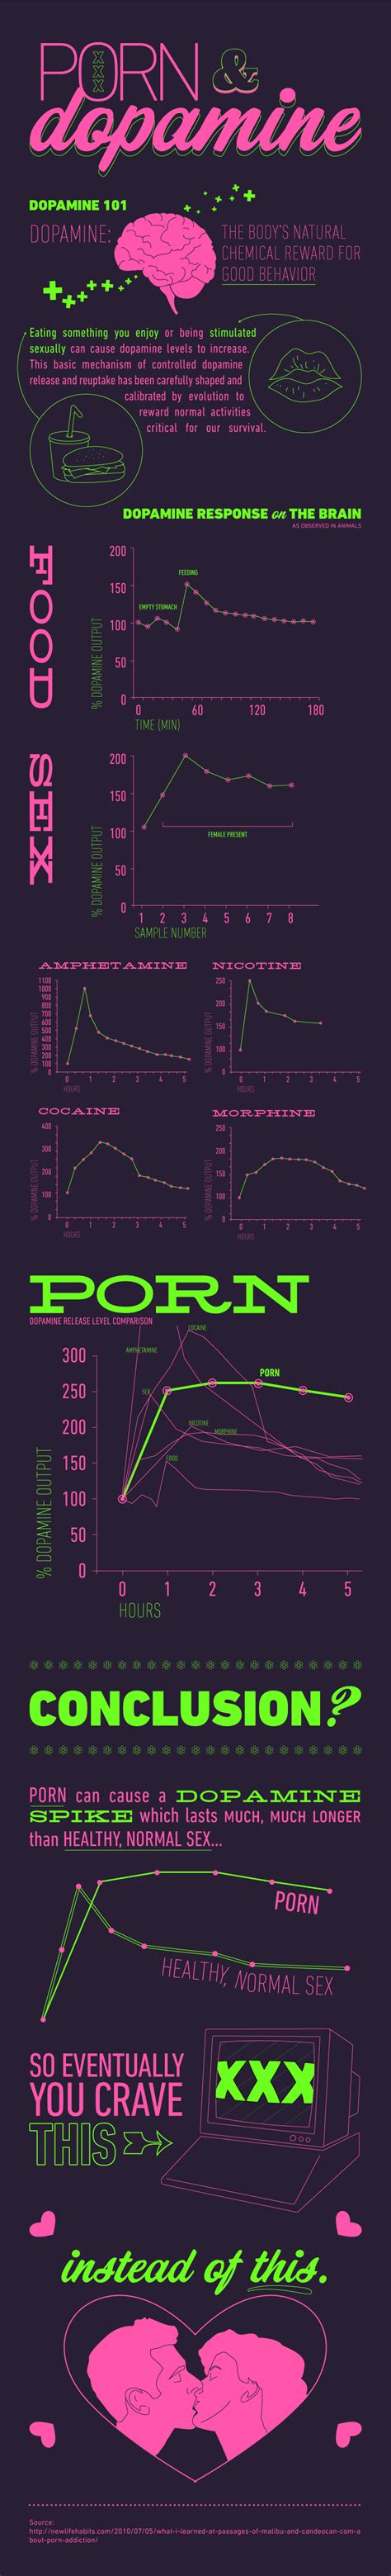 Porn Effects On Dopamine Levels Visual Ly